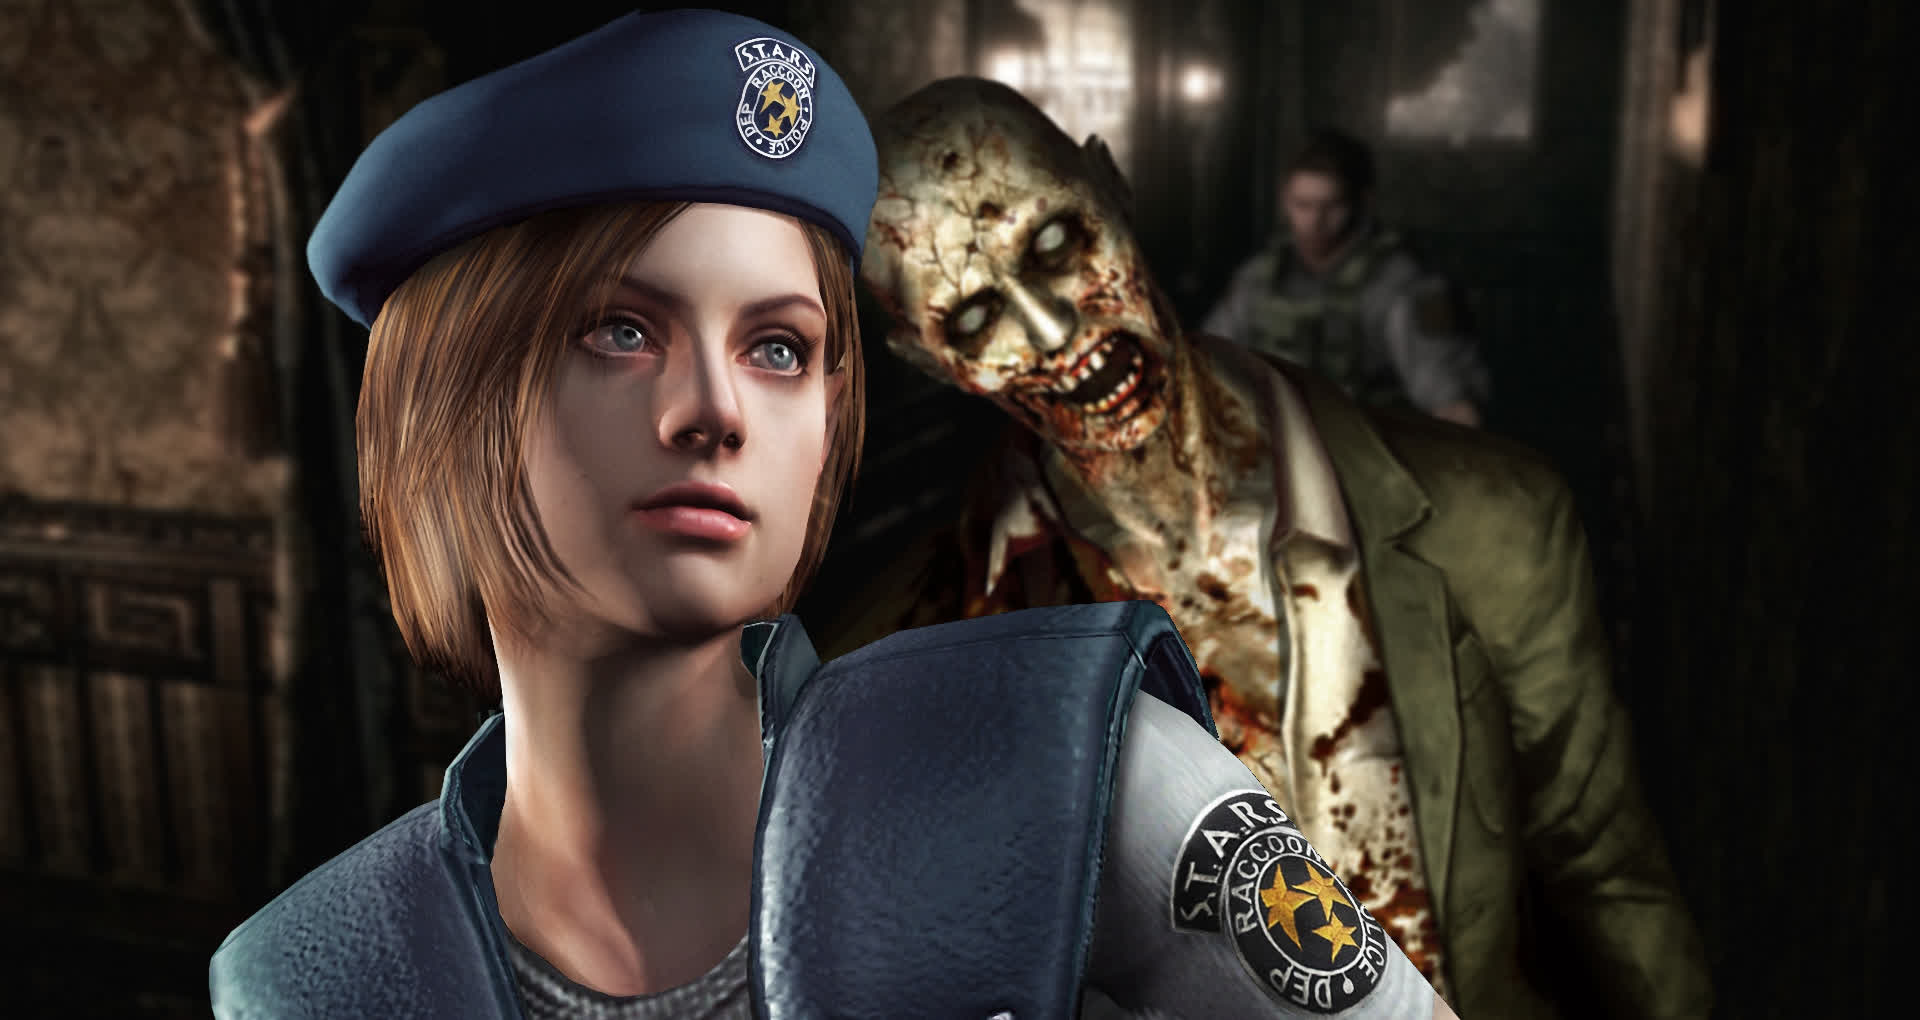 Resident Evil Humble Bundle includes 10 games for $30